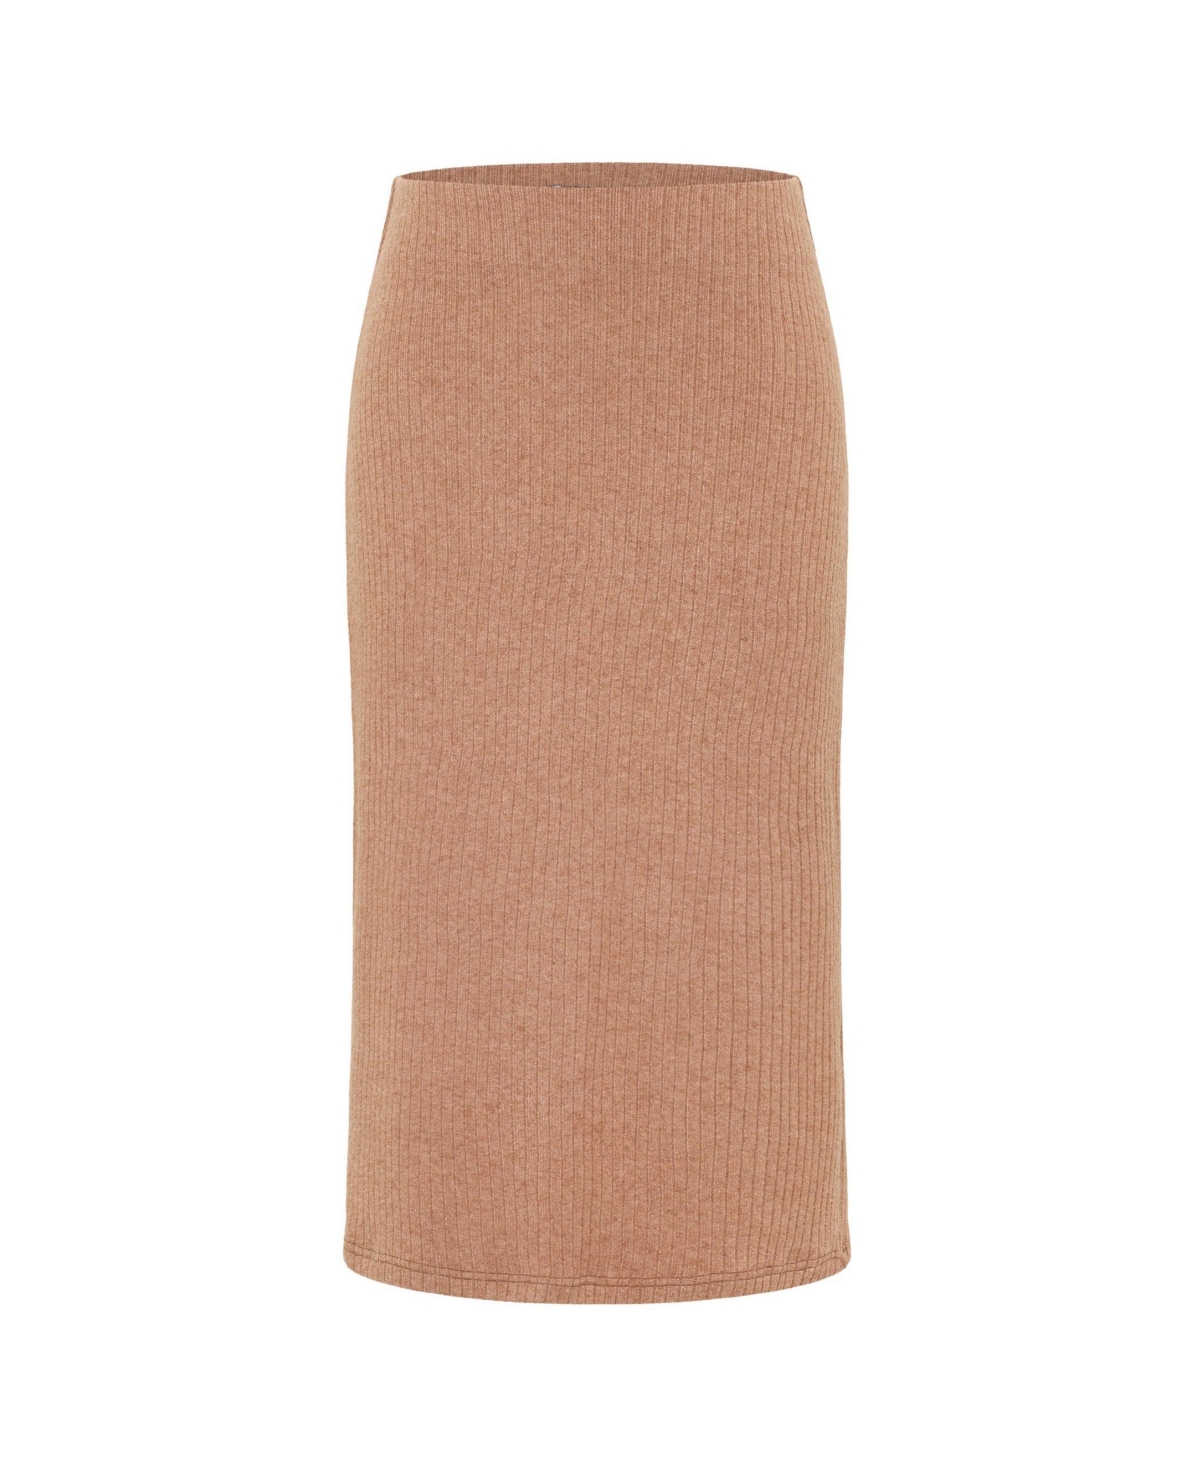 Women's Mid-Rise Knitted Midi Skirt of Premium Stretchy Fabric - Camel